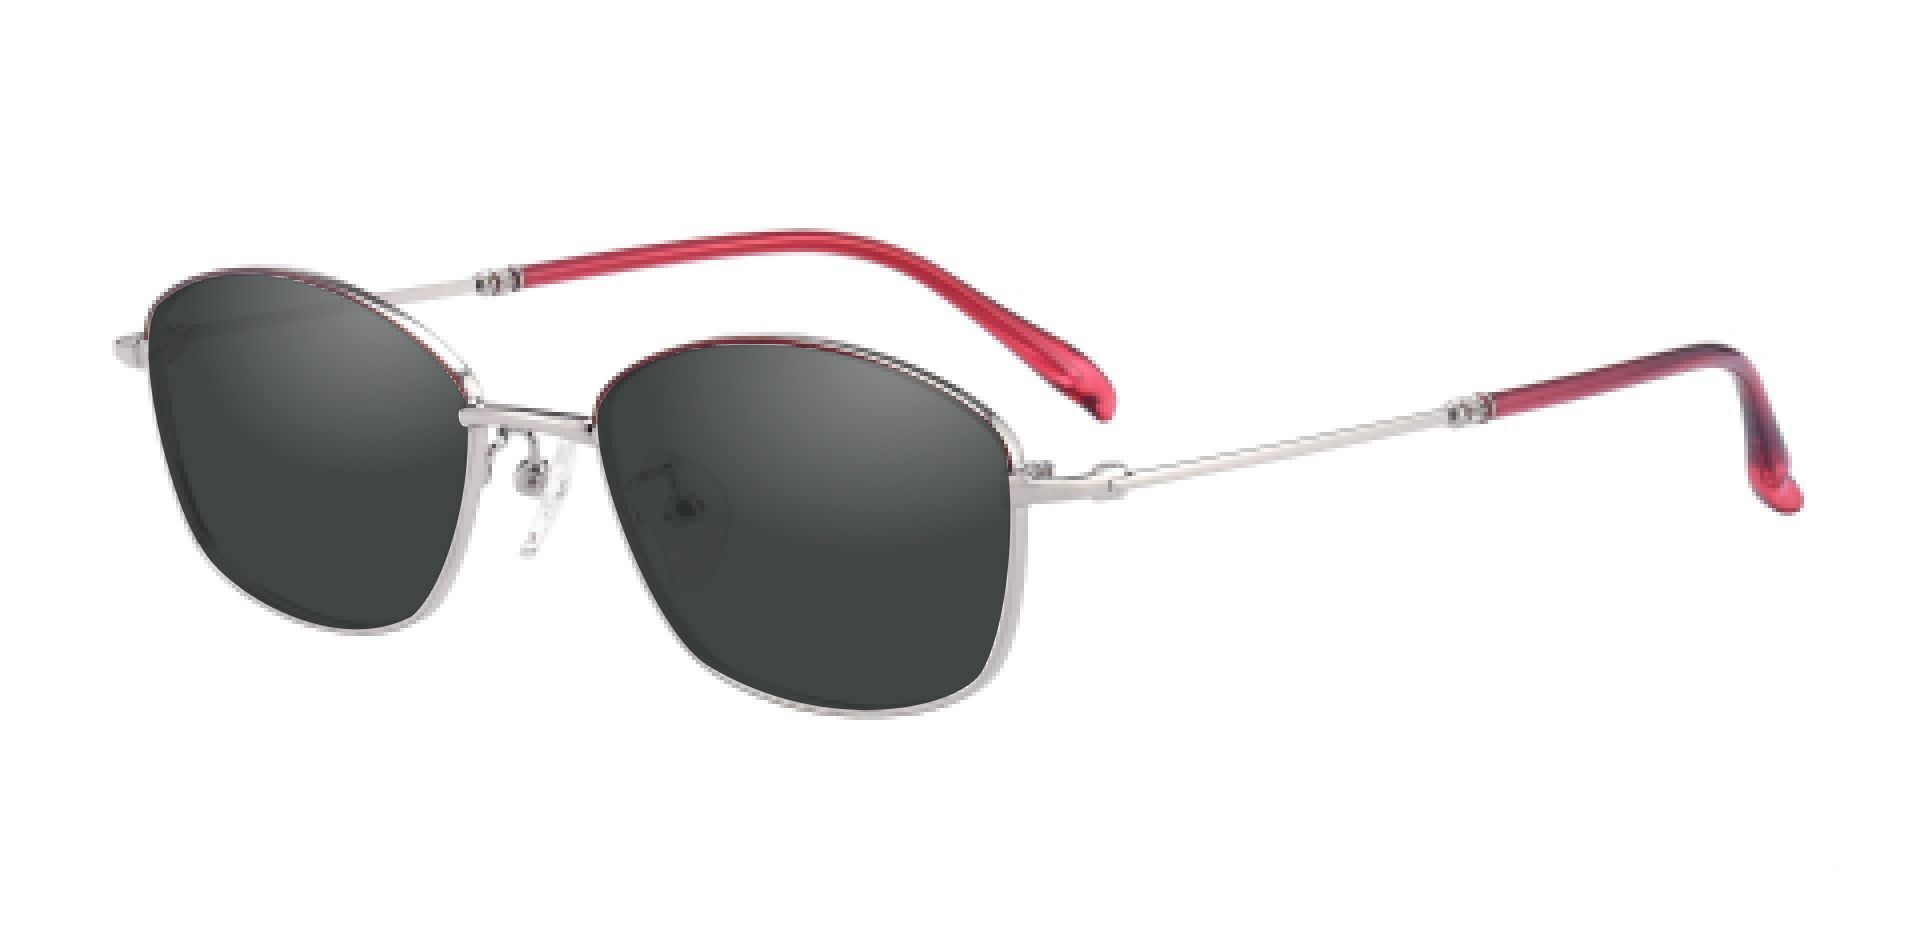 Cortland Oval Reading Sunglasses - Red Frame With Gray Lenses